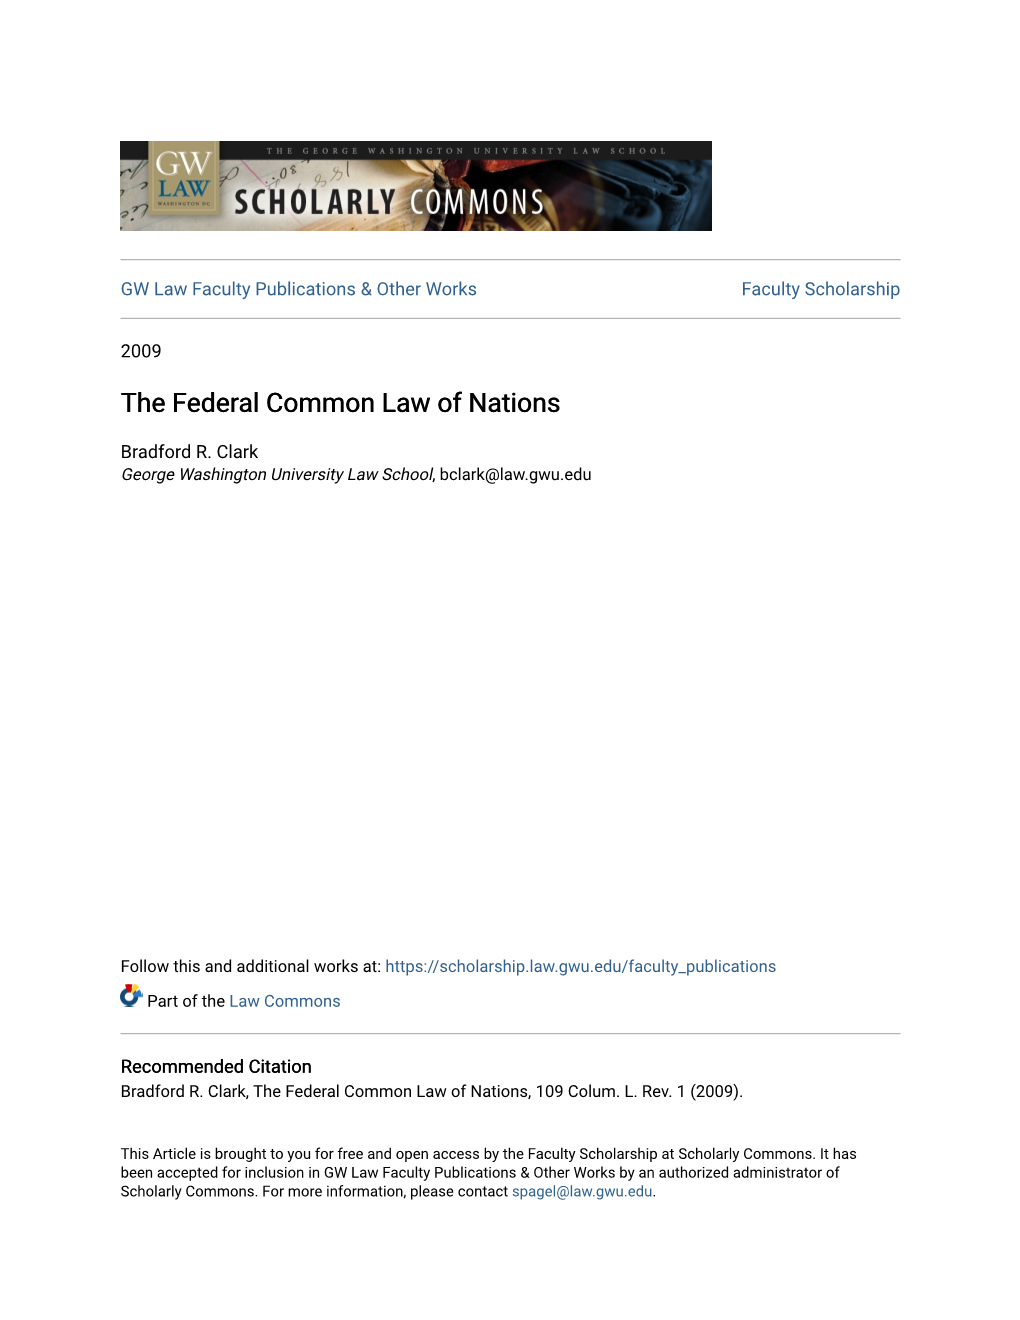 The Federal Common Law of Nations